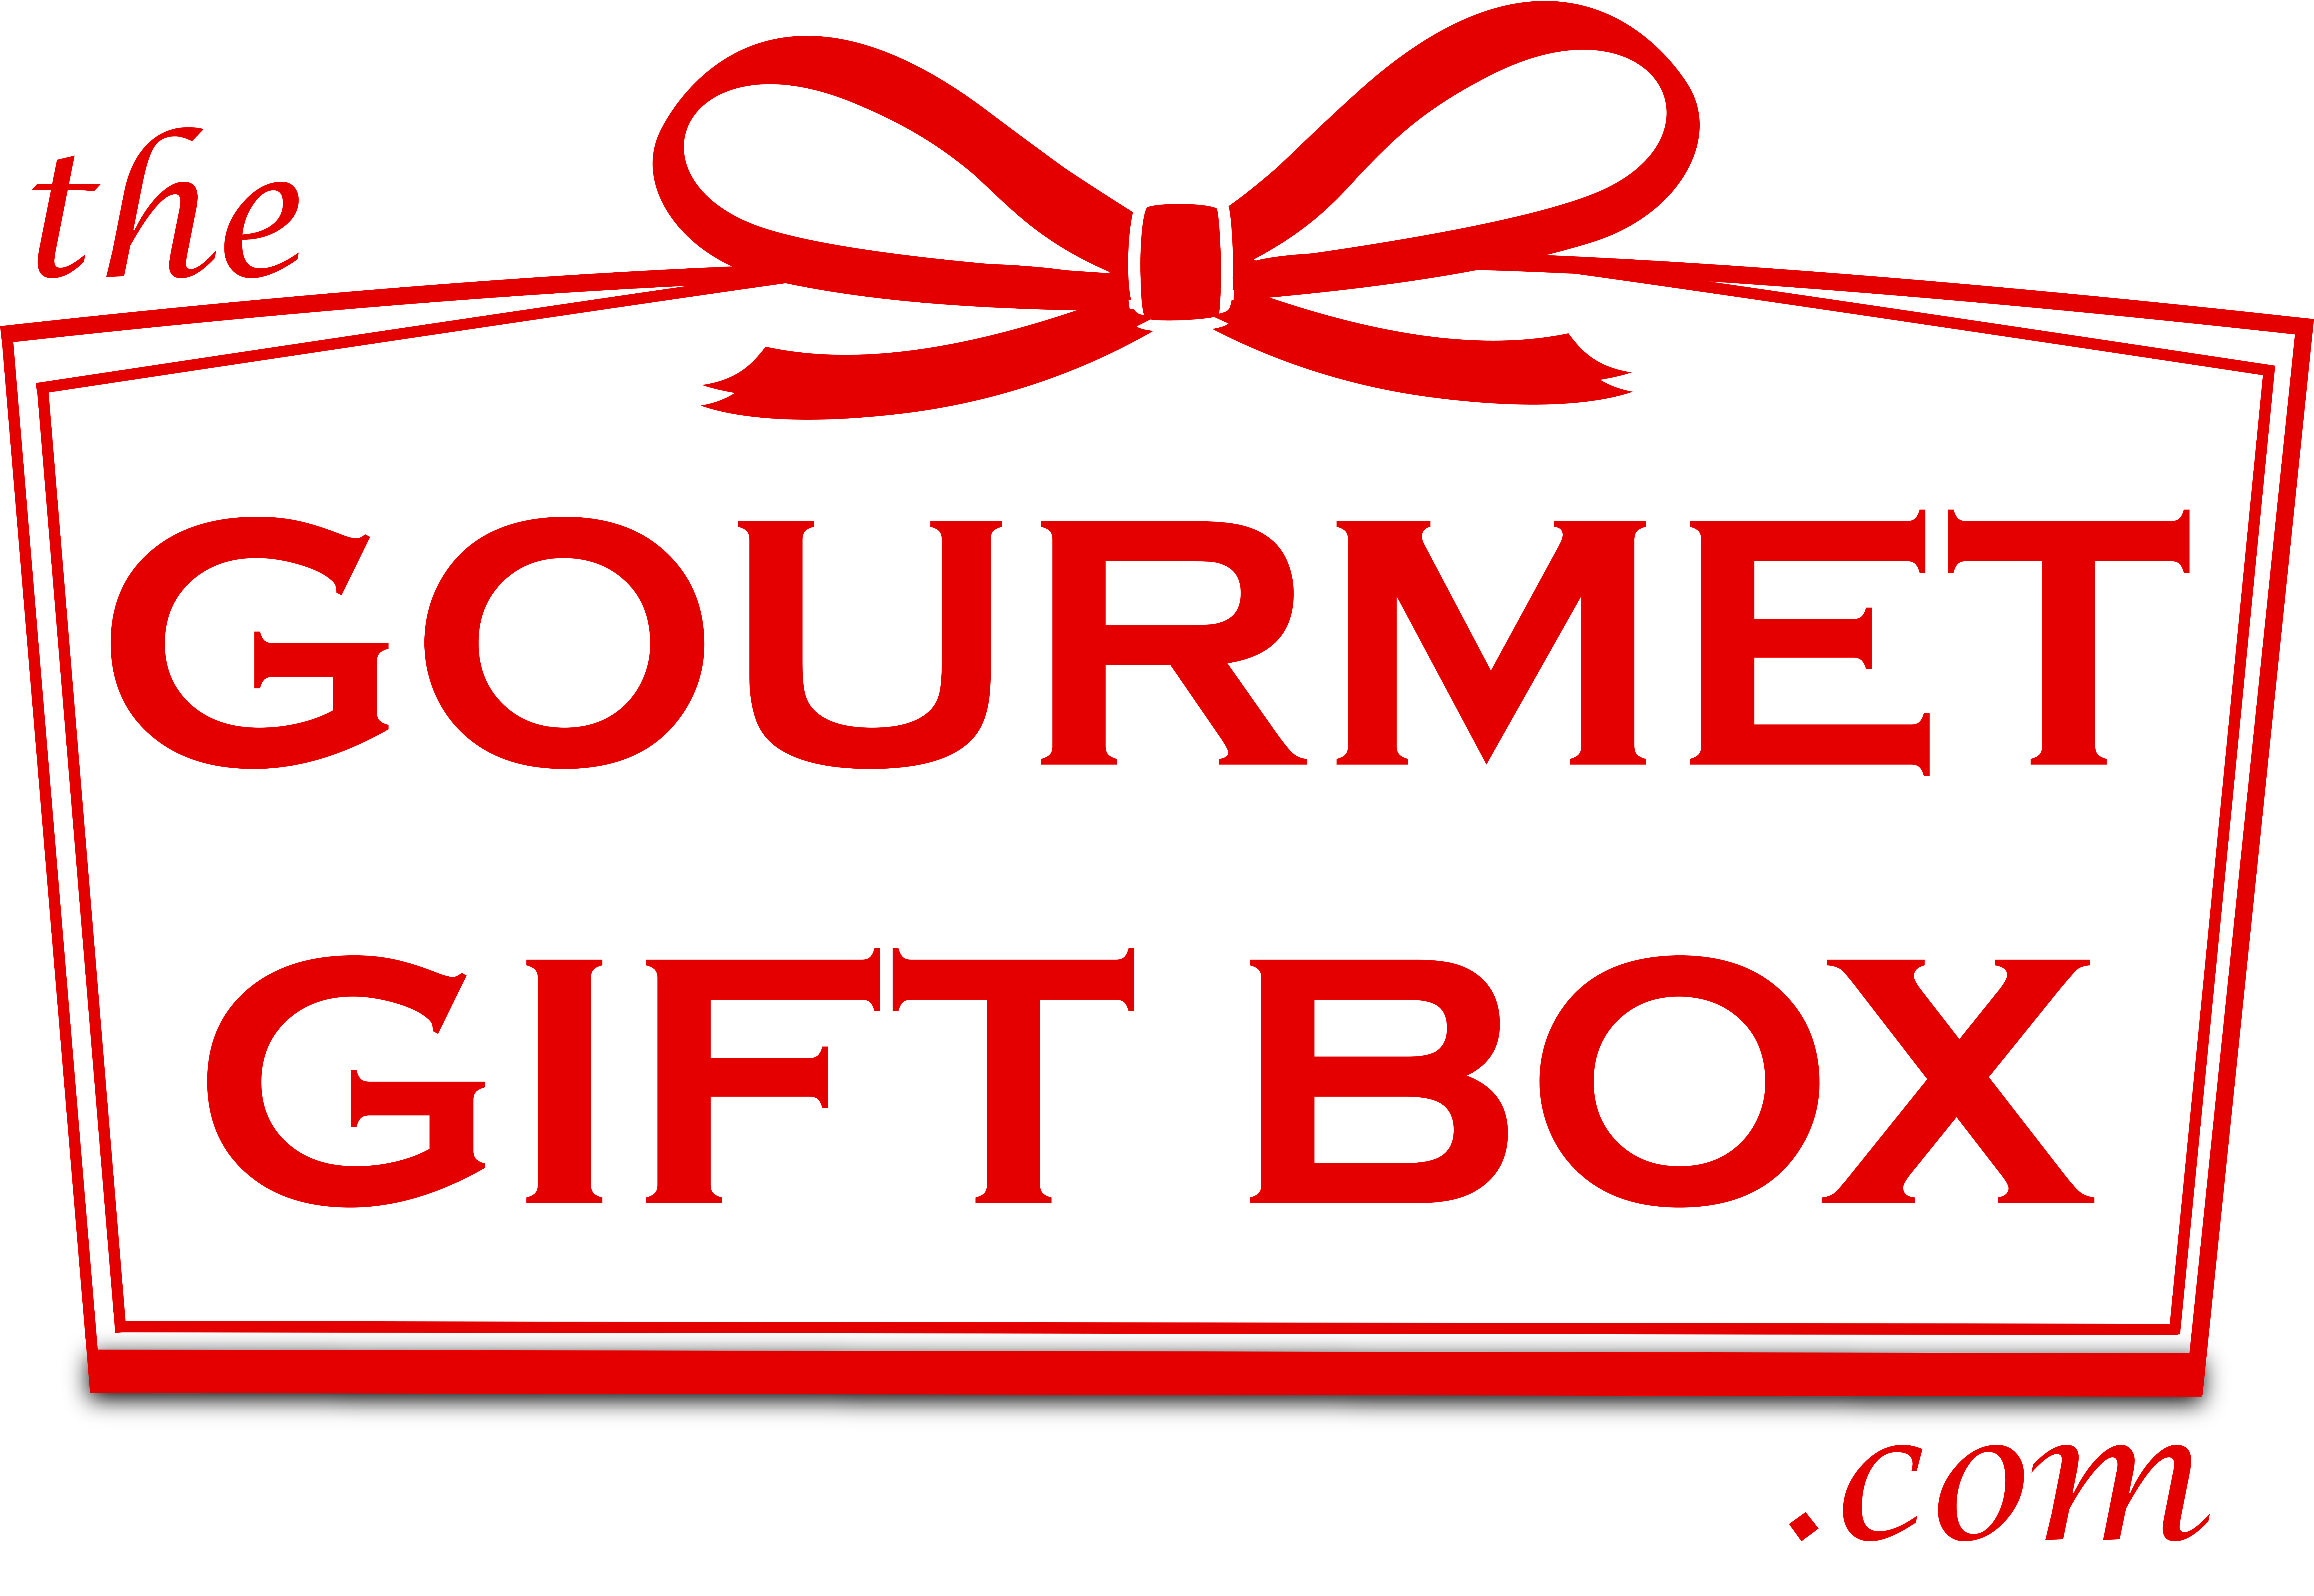 The Gourmet Gift Box